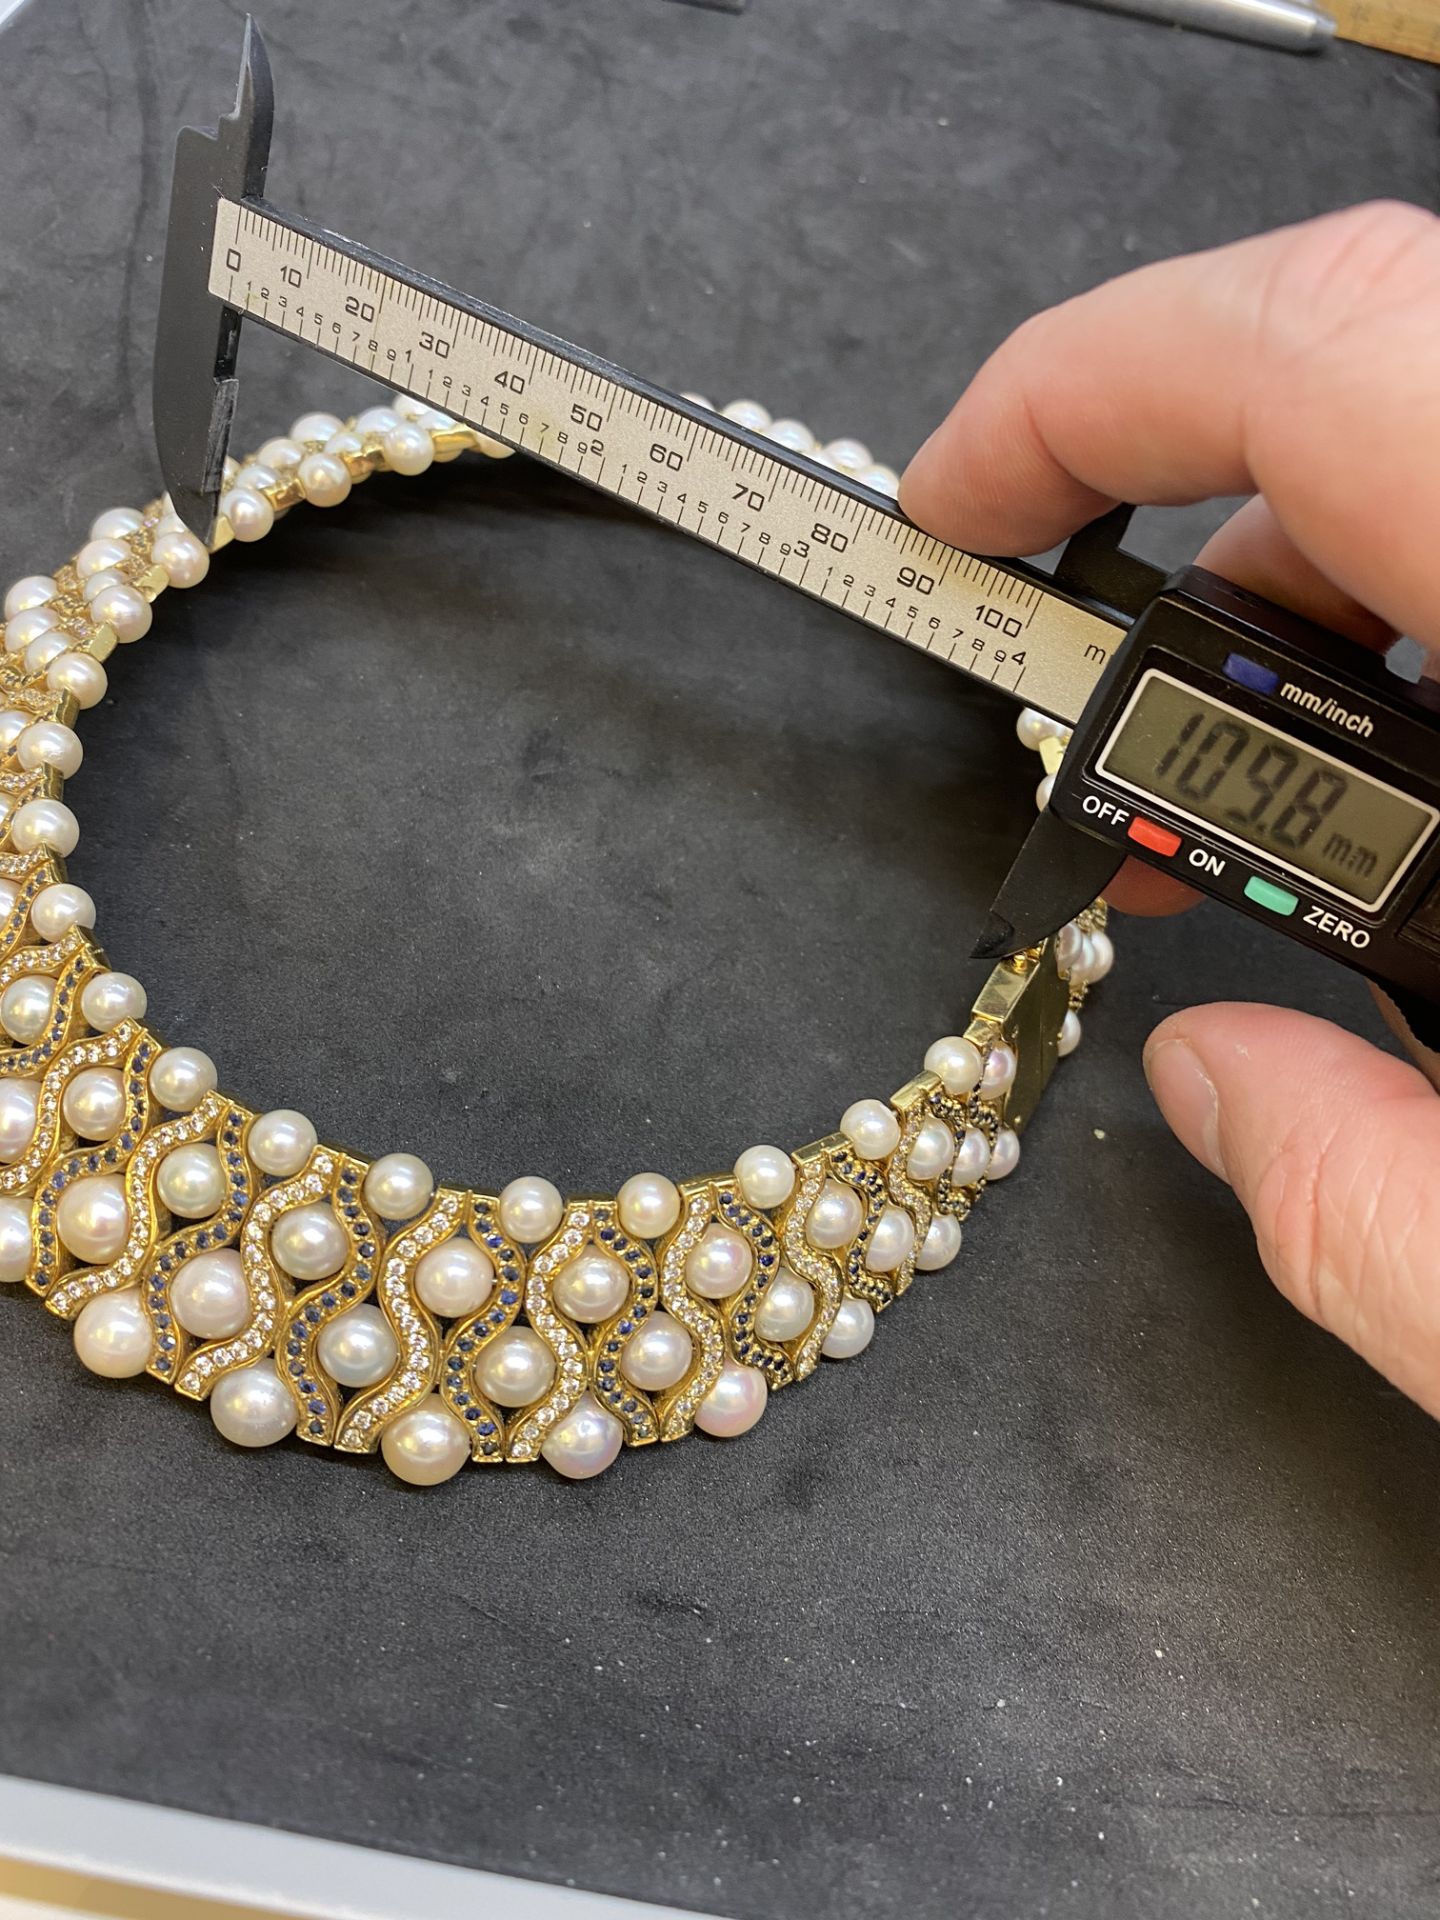 FINE MUST SEE 285 GRAM 18ct GOLD 11.00ct DIAMOND & 12.00ct BLUE SAPPHIRE PEARL CHOKER - £100,000 - Image 14 of 16